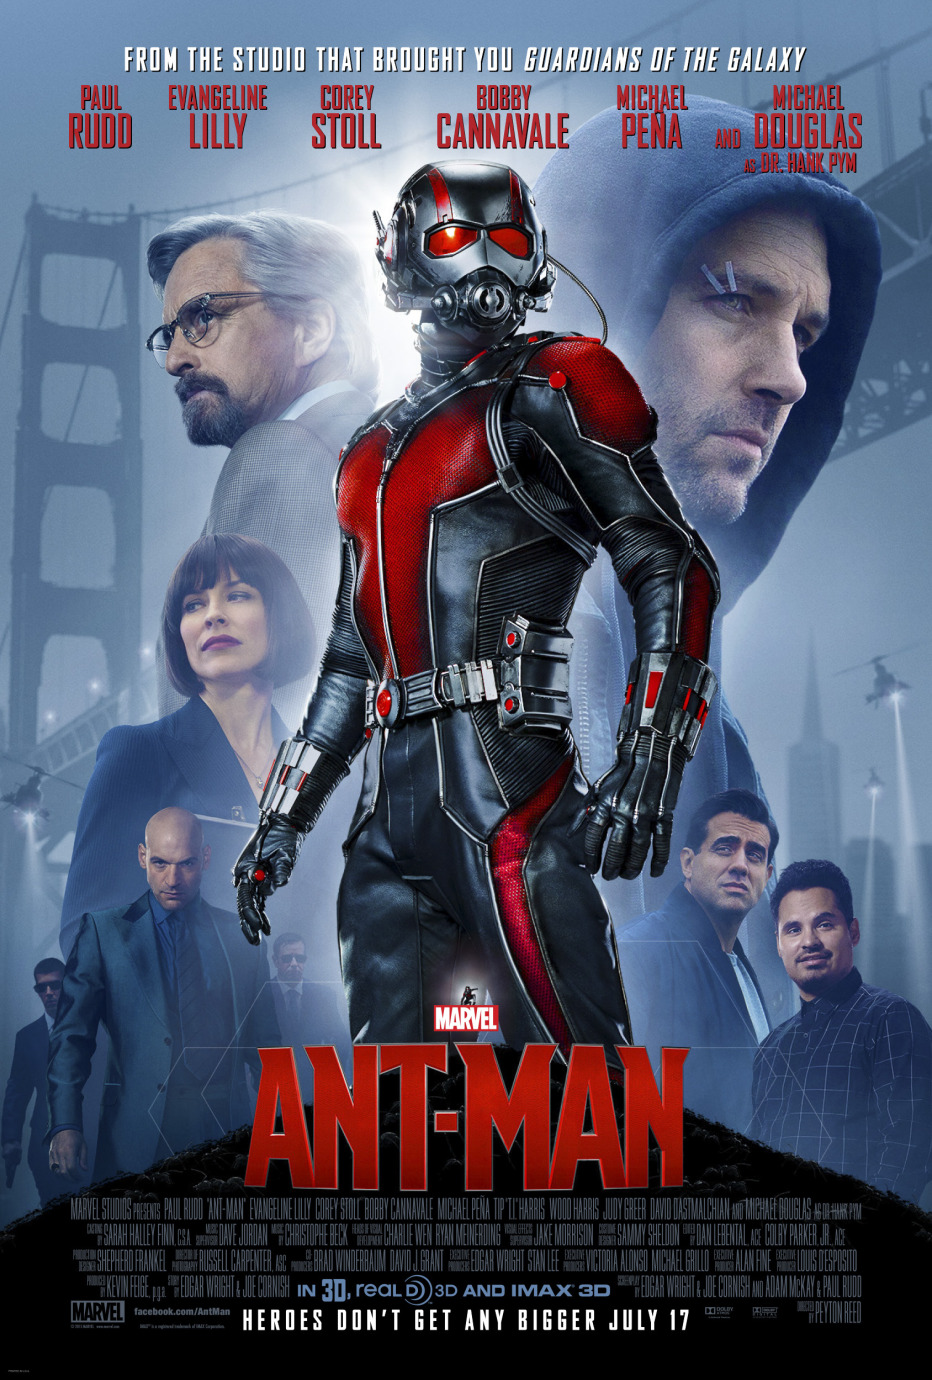 New ANTMAN Poster Revealed!